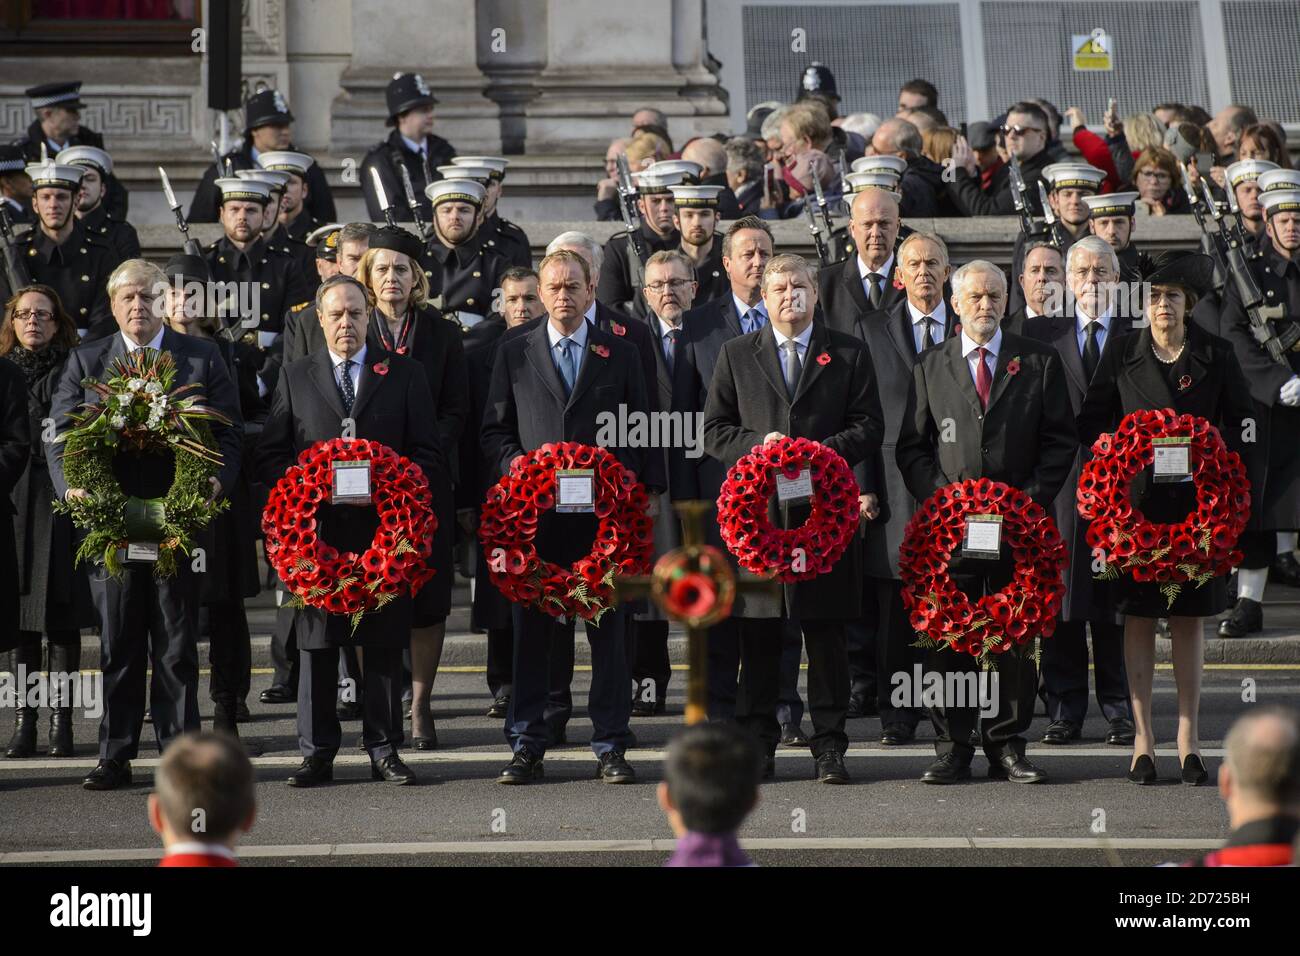 Foreign secretary Boris Johnson, Liberal Democrat leader Tim Farron, SNP Deputy Leader Angus Robertson, Labour leader Jeremy Corbyn, Prime Minister Theresa May, and former prime ministers David Cameron, Tony Blair and John Major, during the annual Remembrance Sunday Service at the Cenotaph memorial in Whitehall, central London, held in tribute for members of the armed forces who have died in major conflicts. Picture date: Sunday November 13th, 2016. Photo credit should read: Matt Crossick/ EMPICS Entertainment. Stock Photo